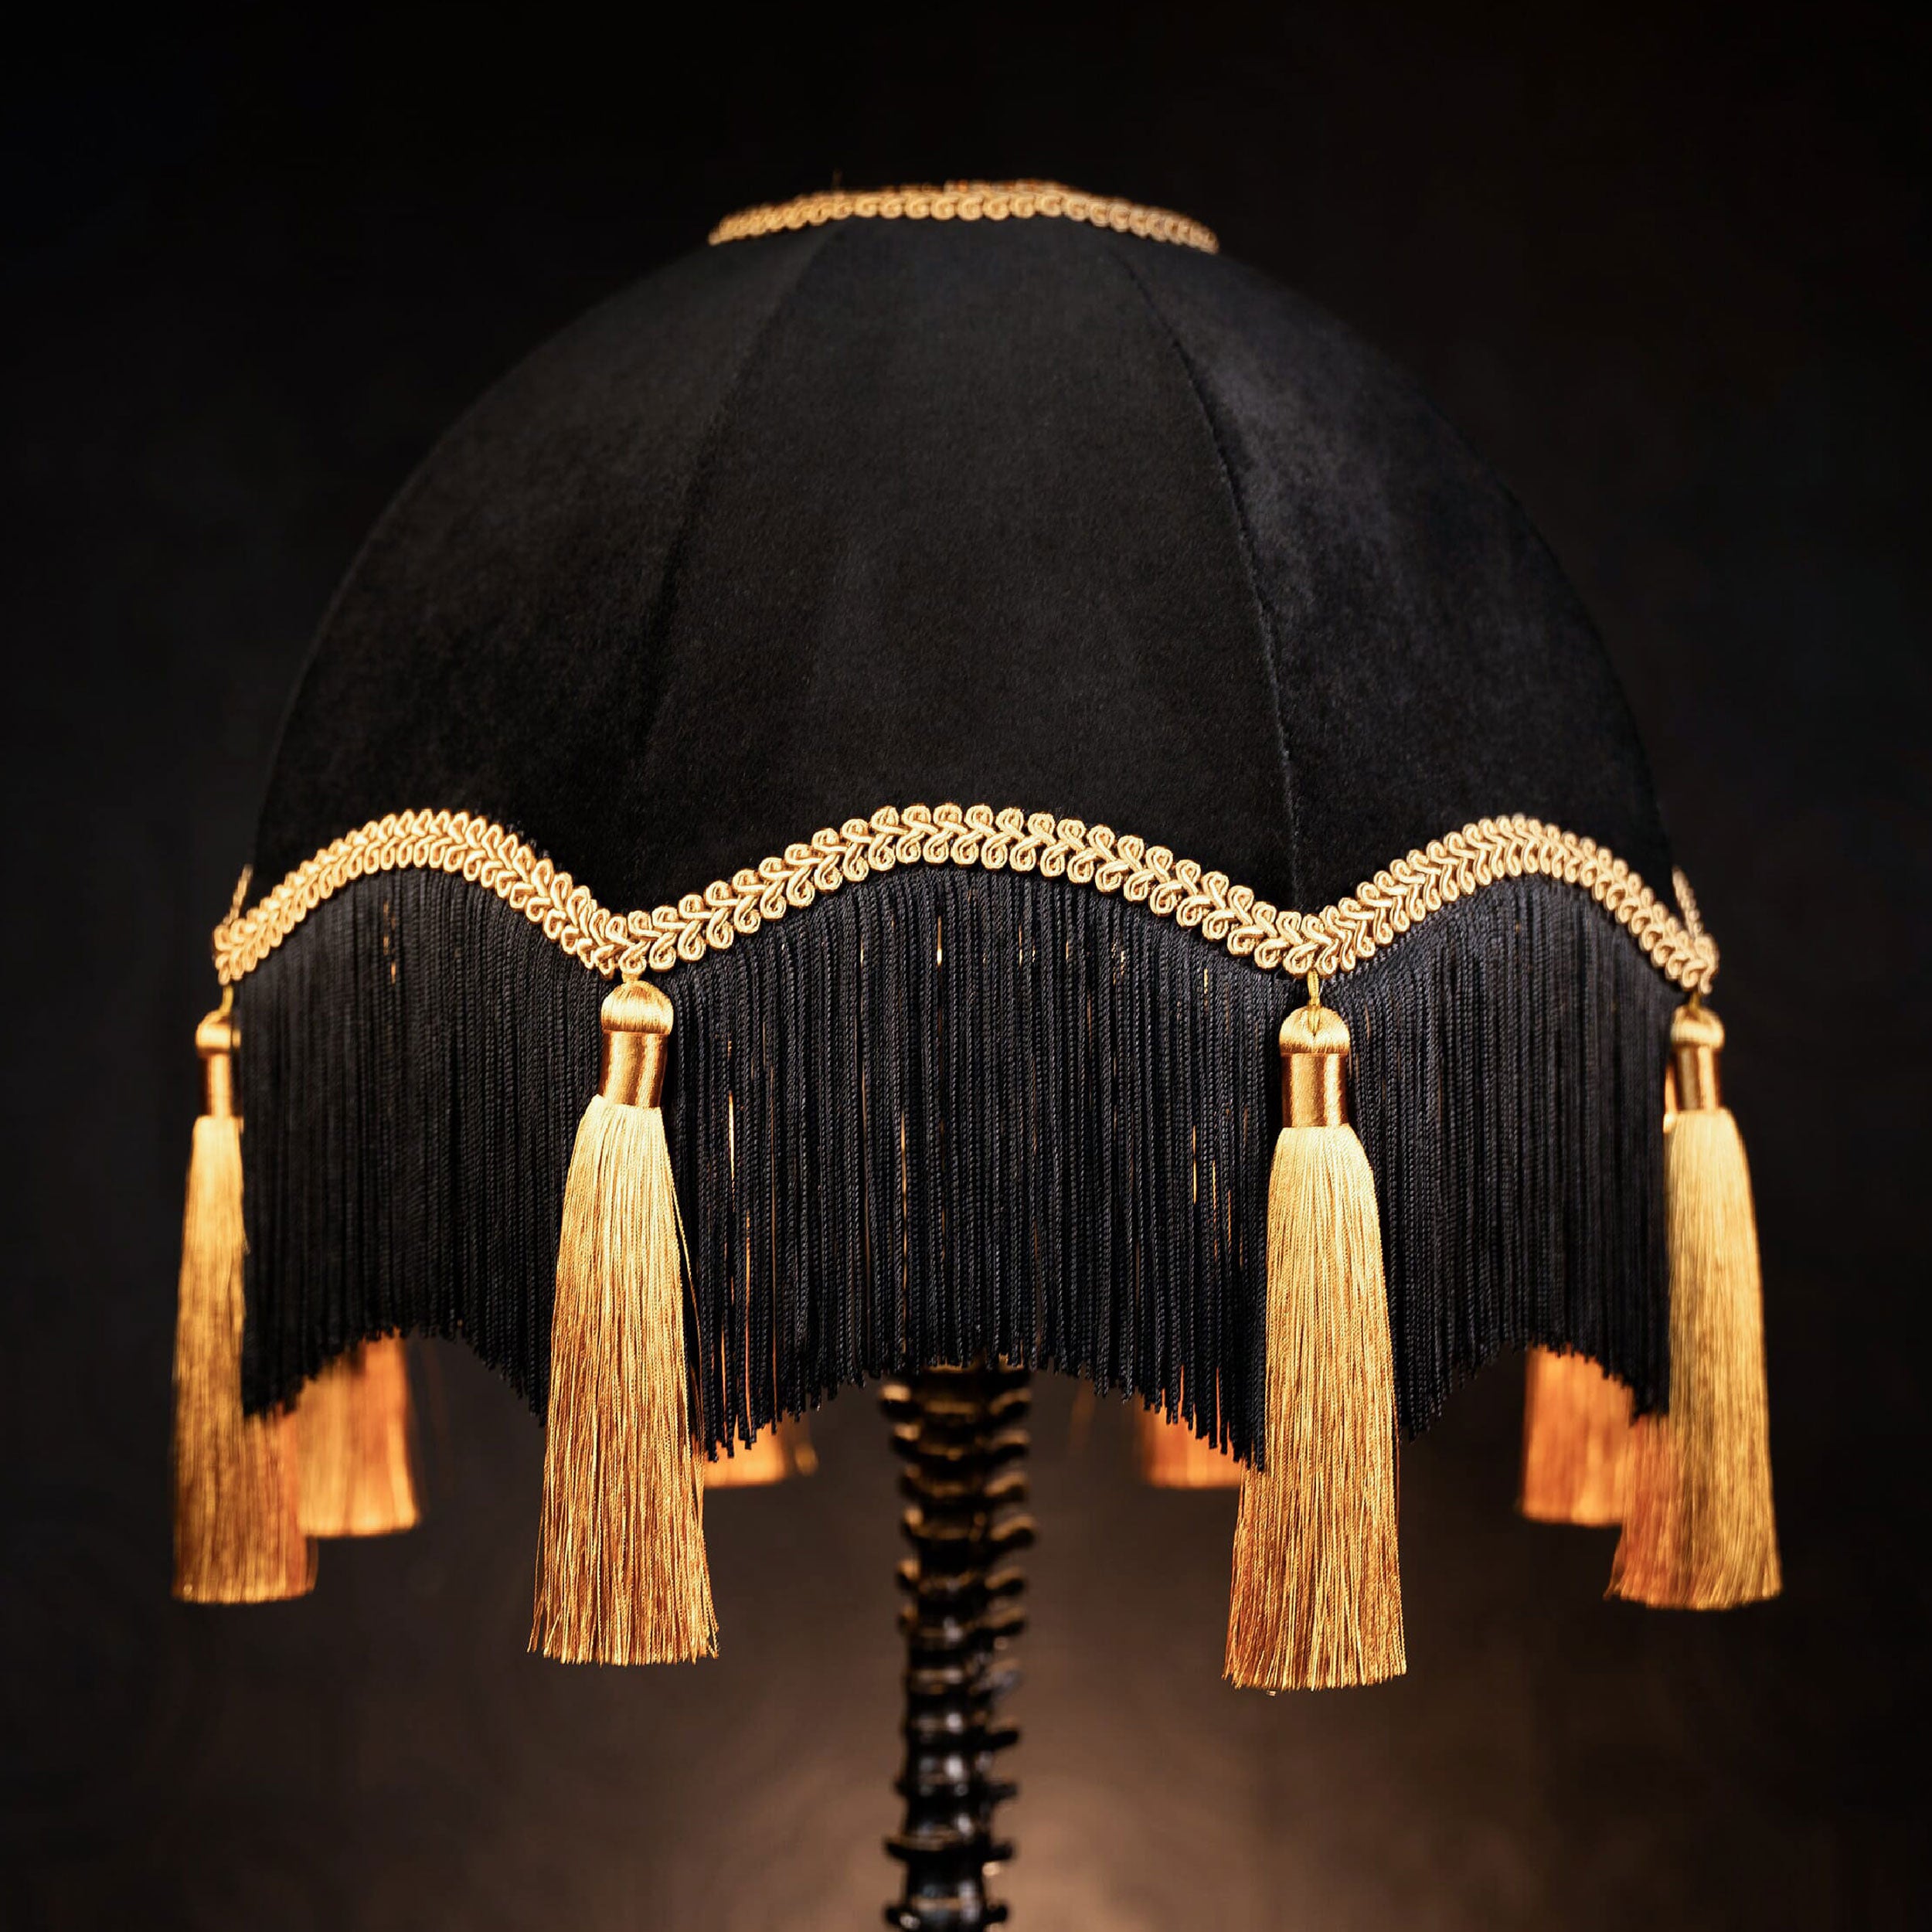 portia baroque tassel lampshade fringe lampshade downtown abbey lampshade - the blackened teeth - gothic decor